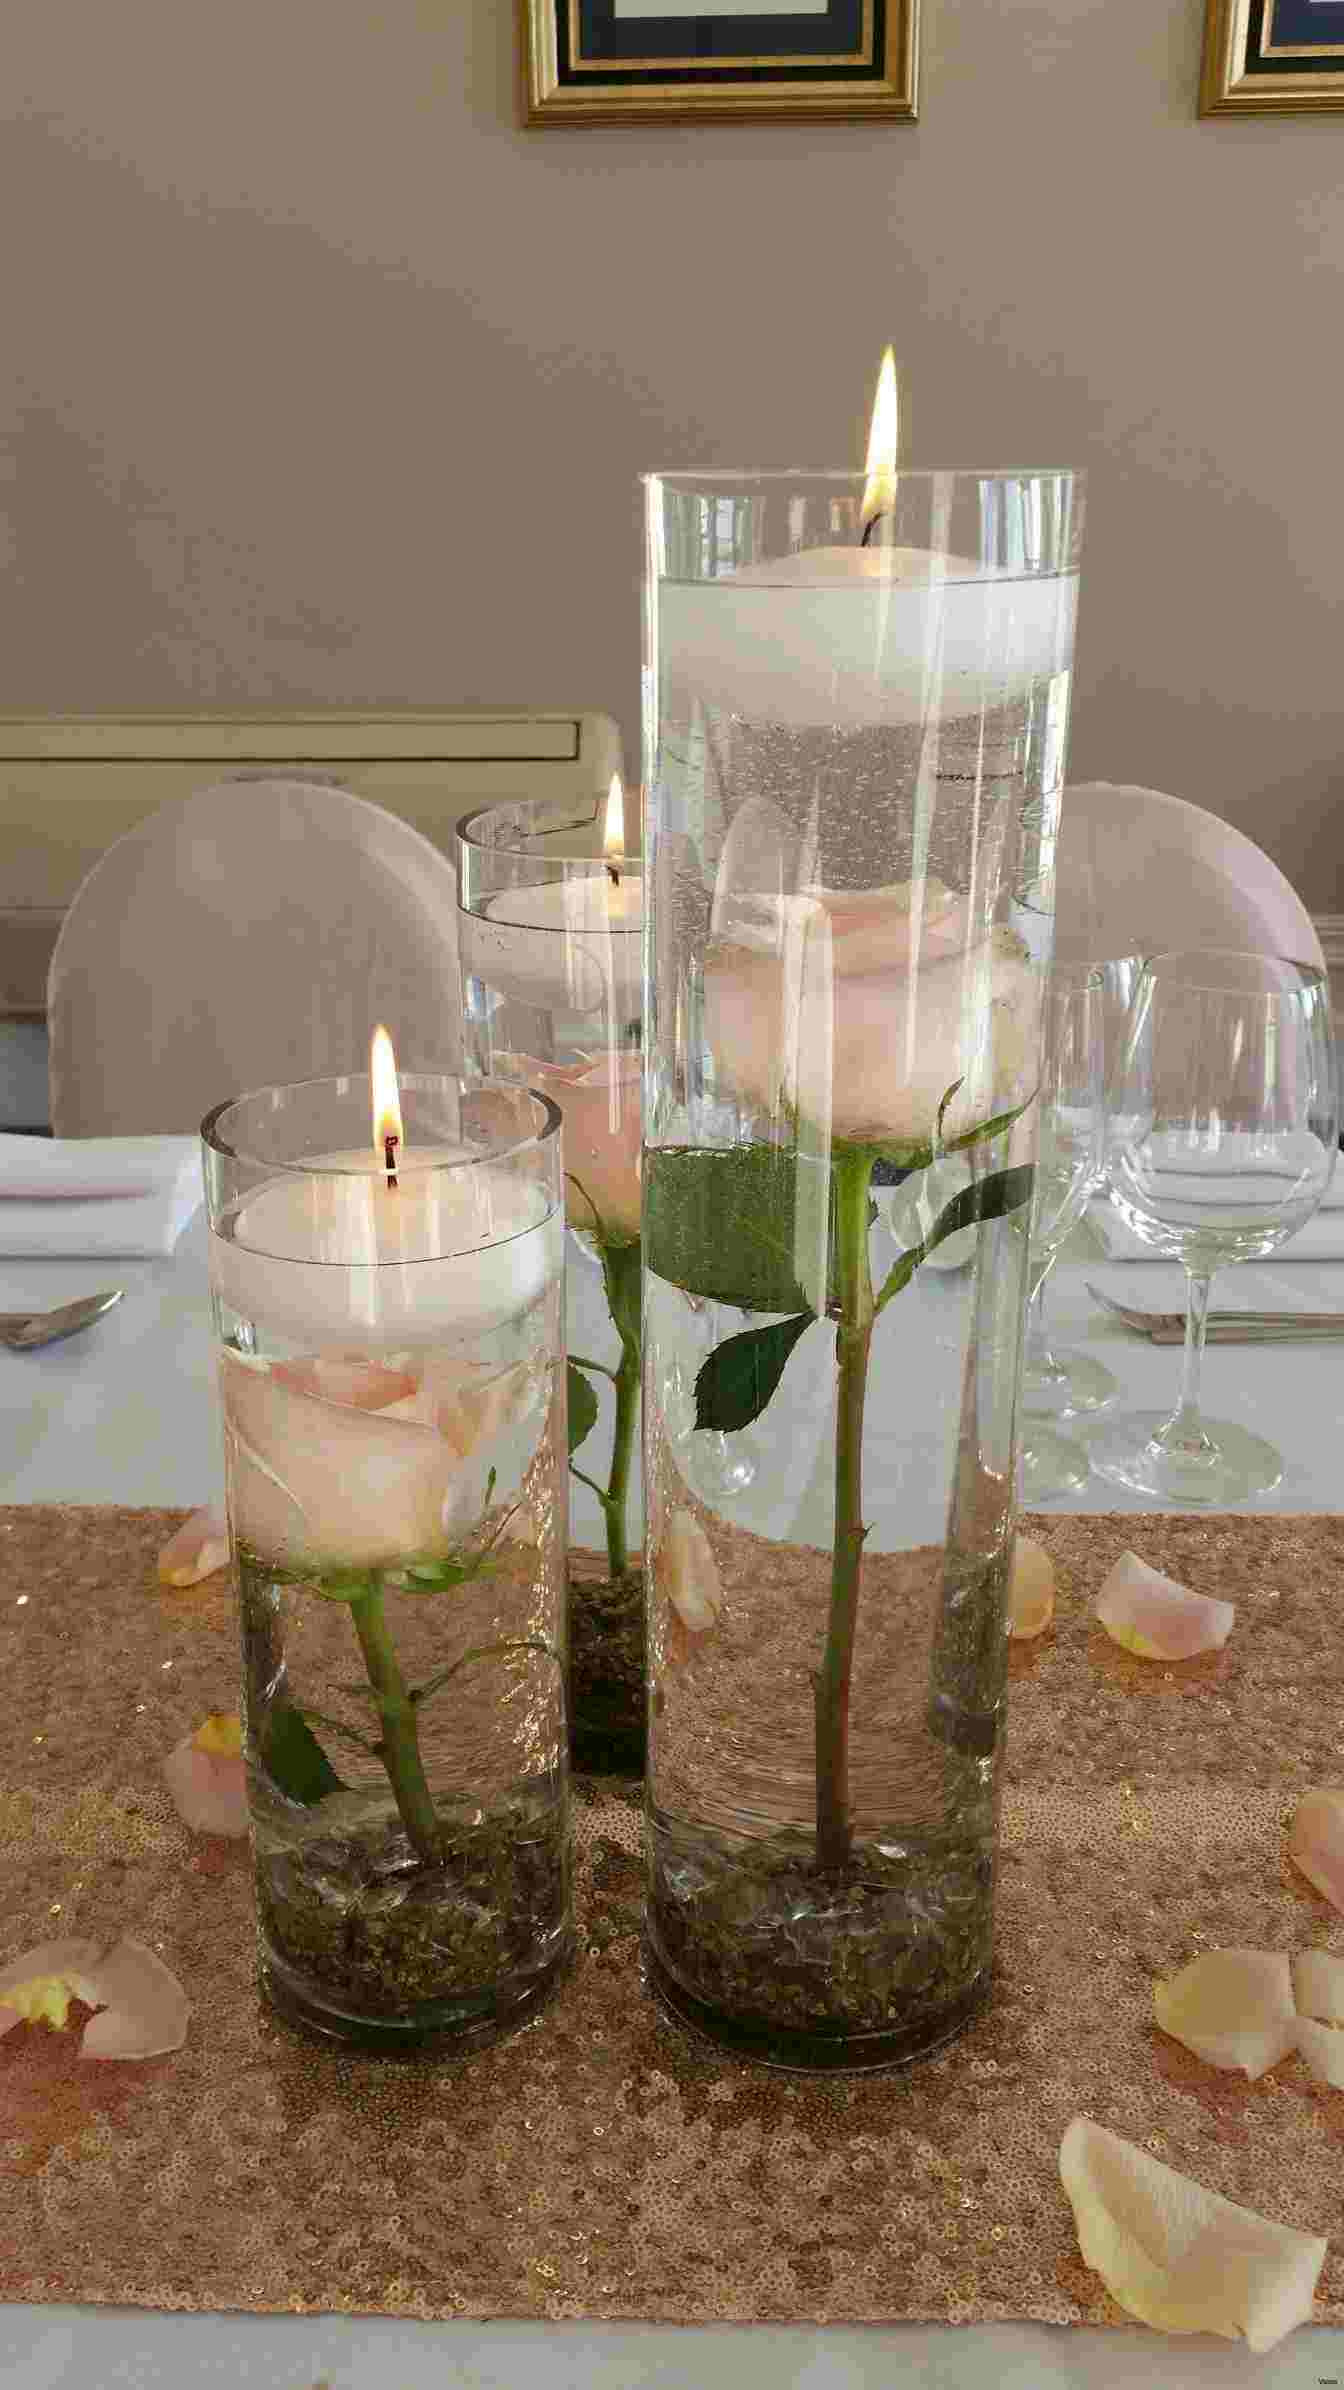 flower vase filler ideas of glass candle cylinders lovely although glass bead vase filler 1 4h inside glass candle cylinders best of although the 25 best floating candle holders ideas pinterest also candles